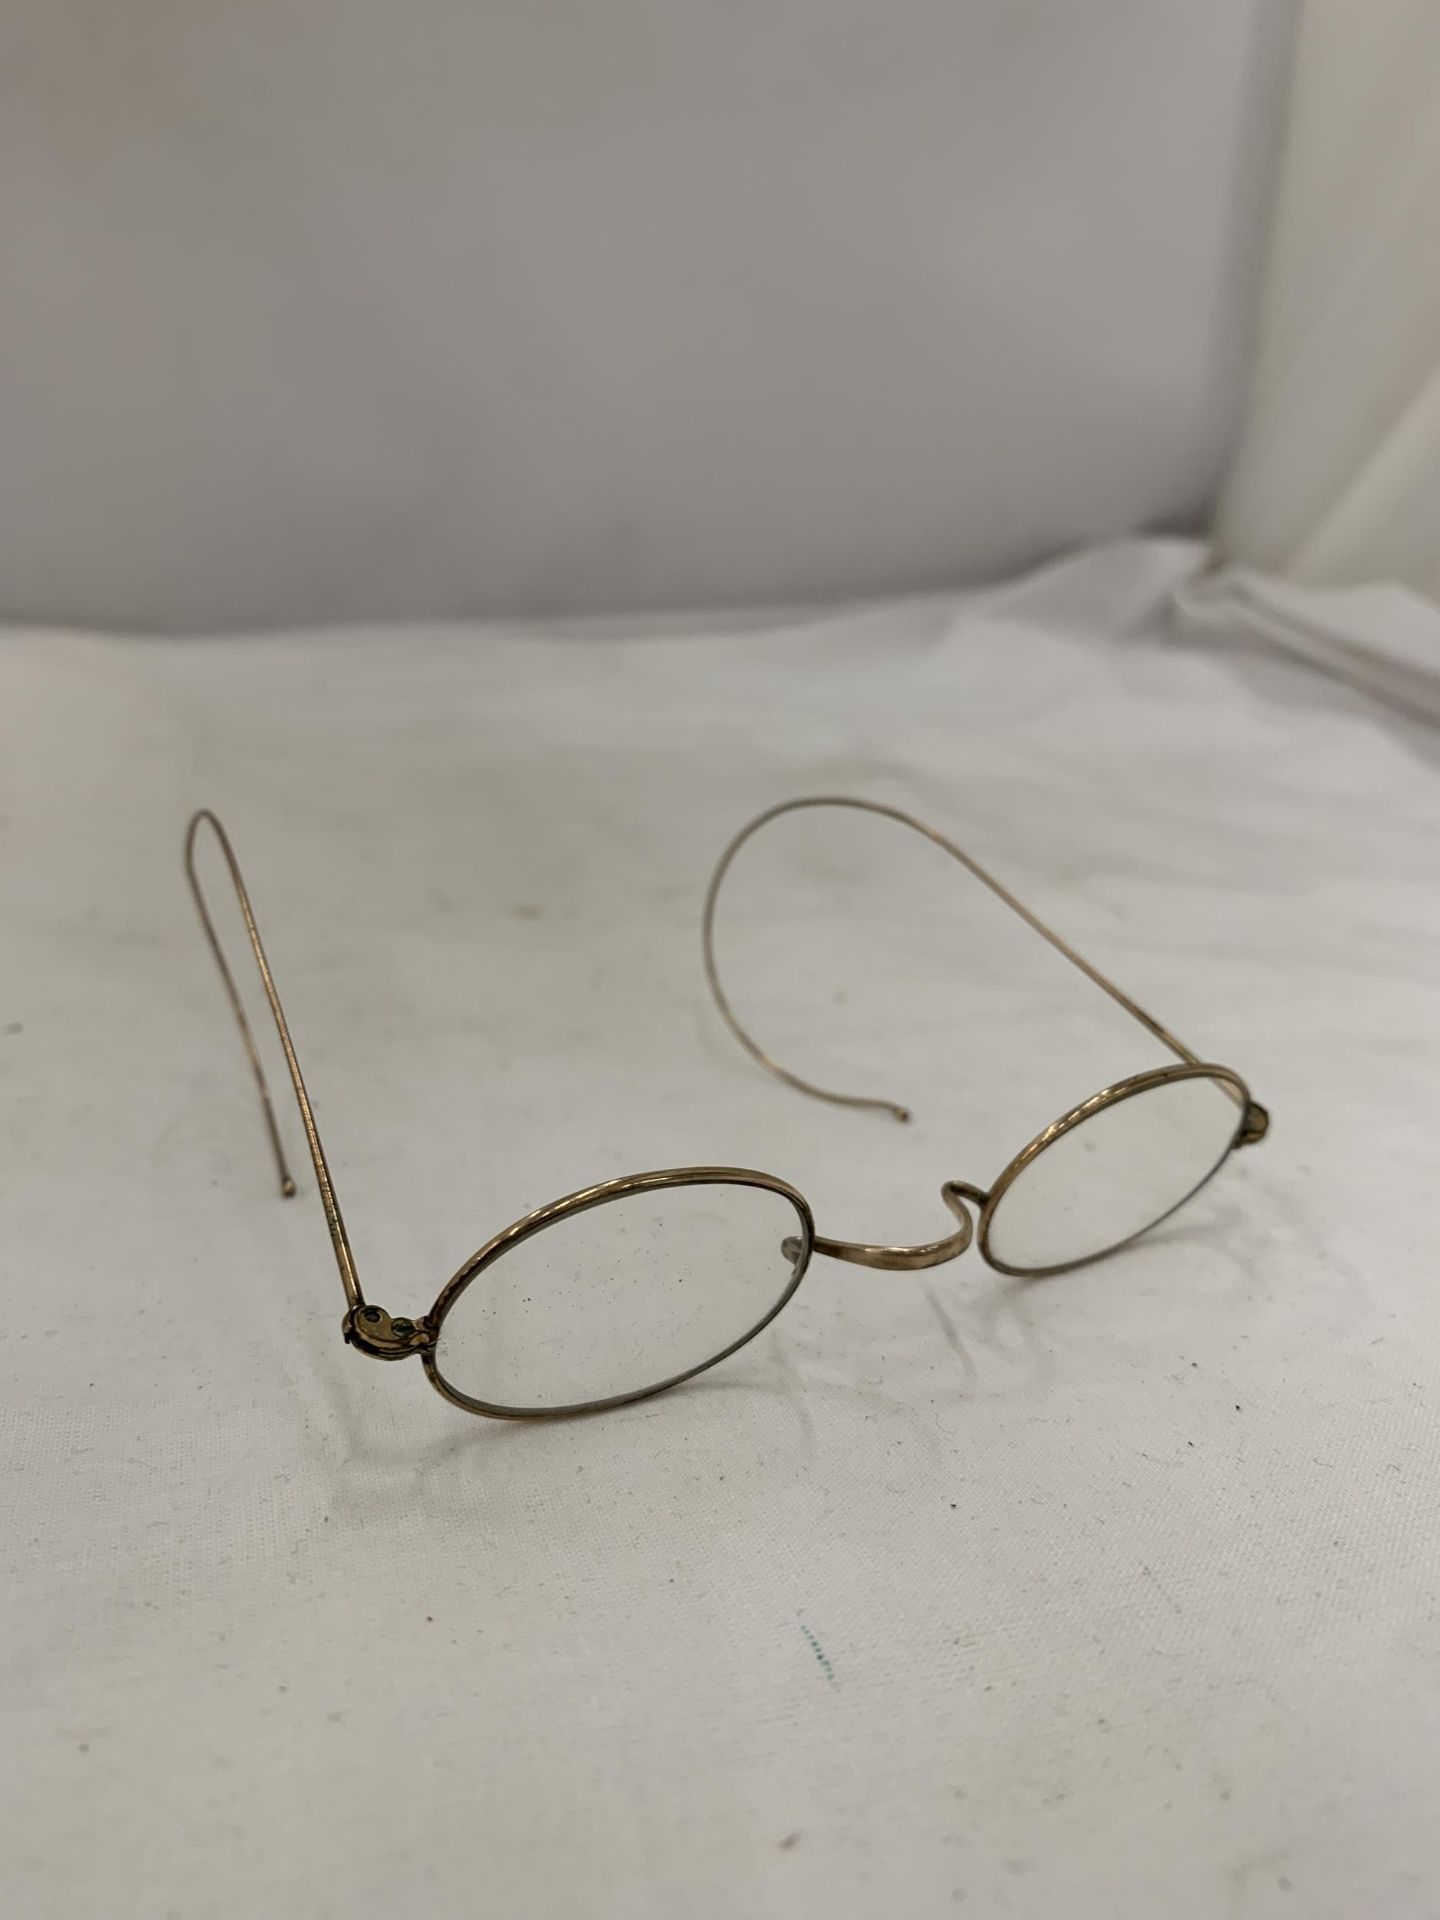 A PAIR OF VICTORIAN SPECTACLES, CASED - Image 3 of 4